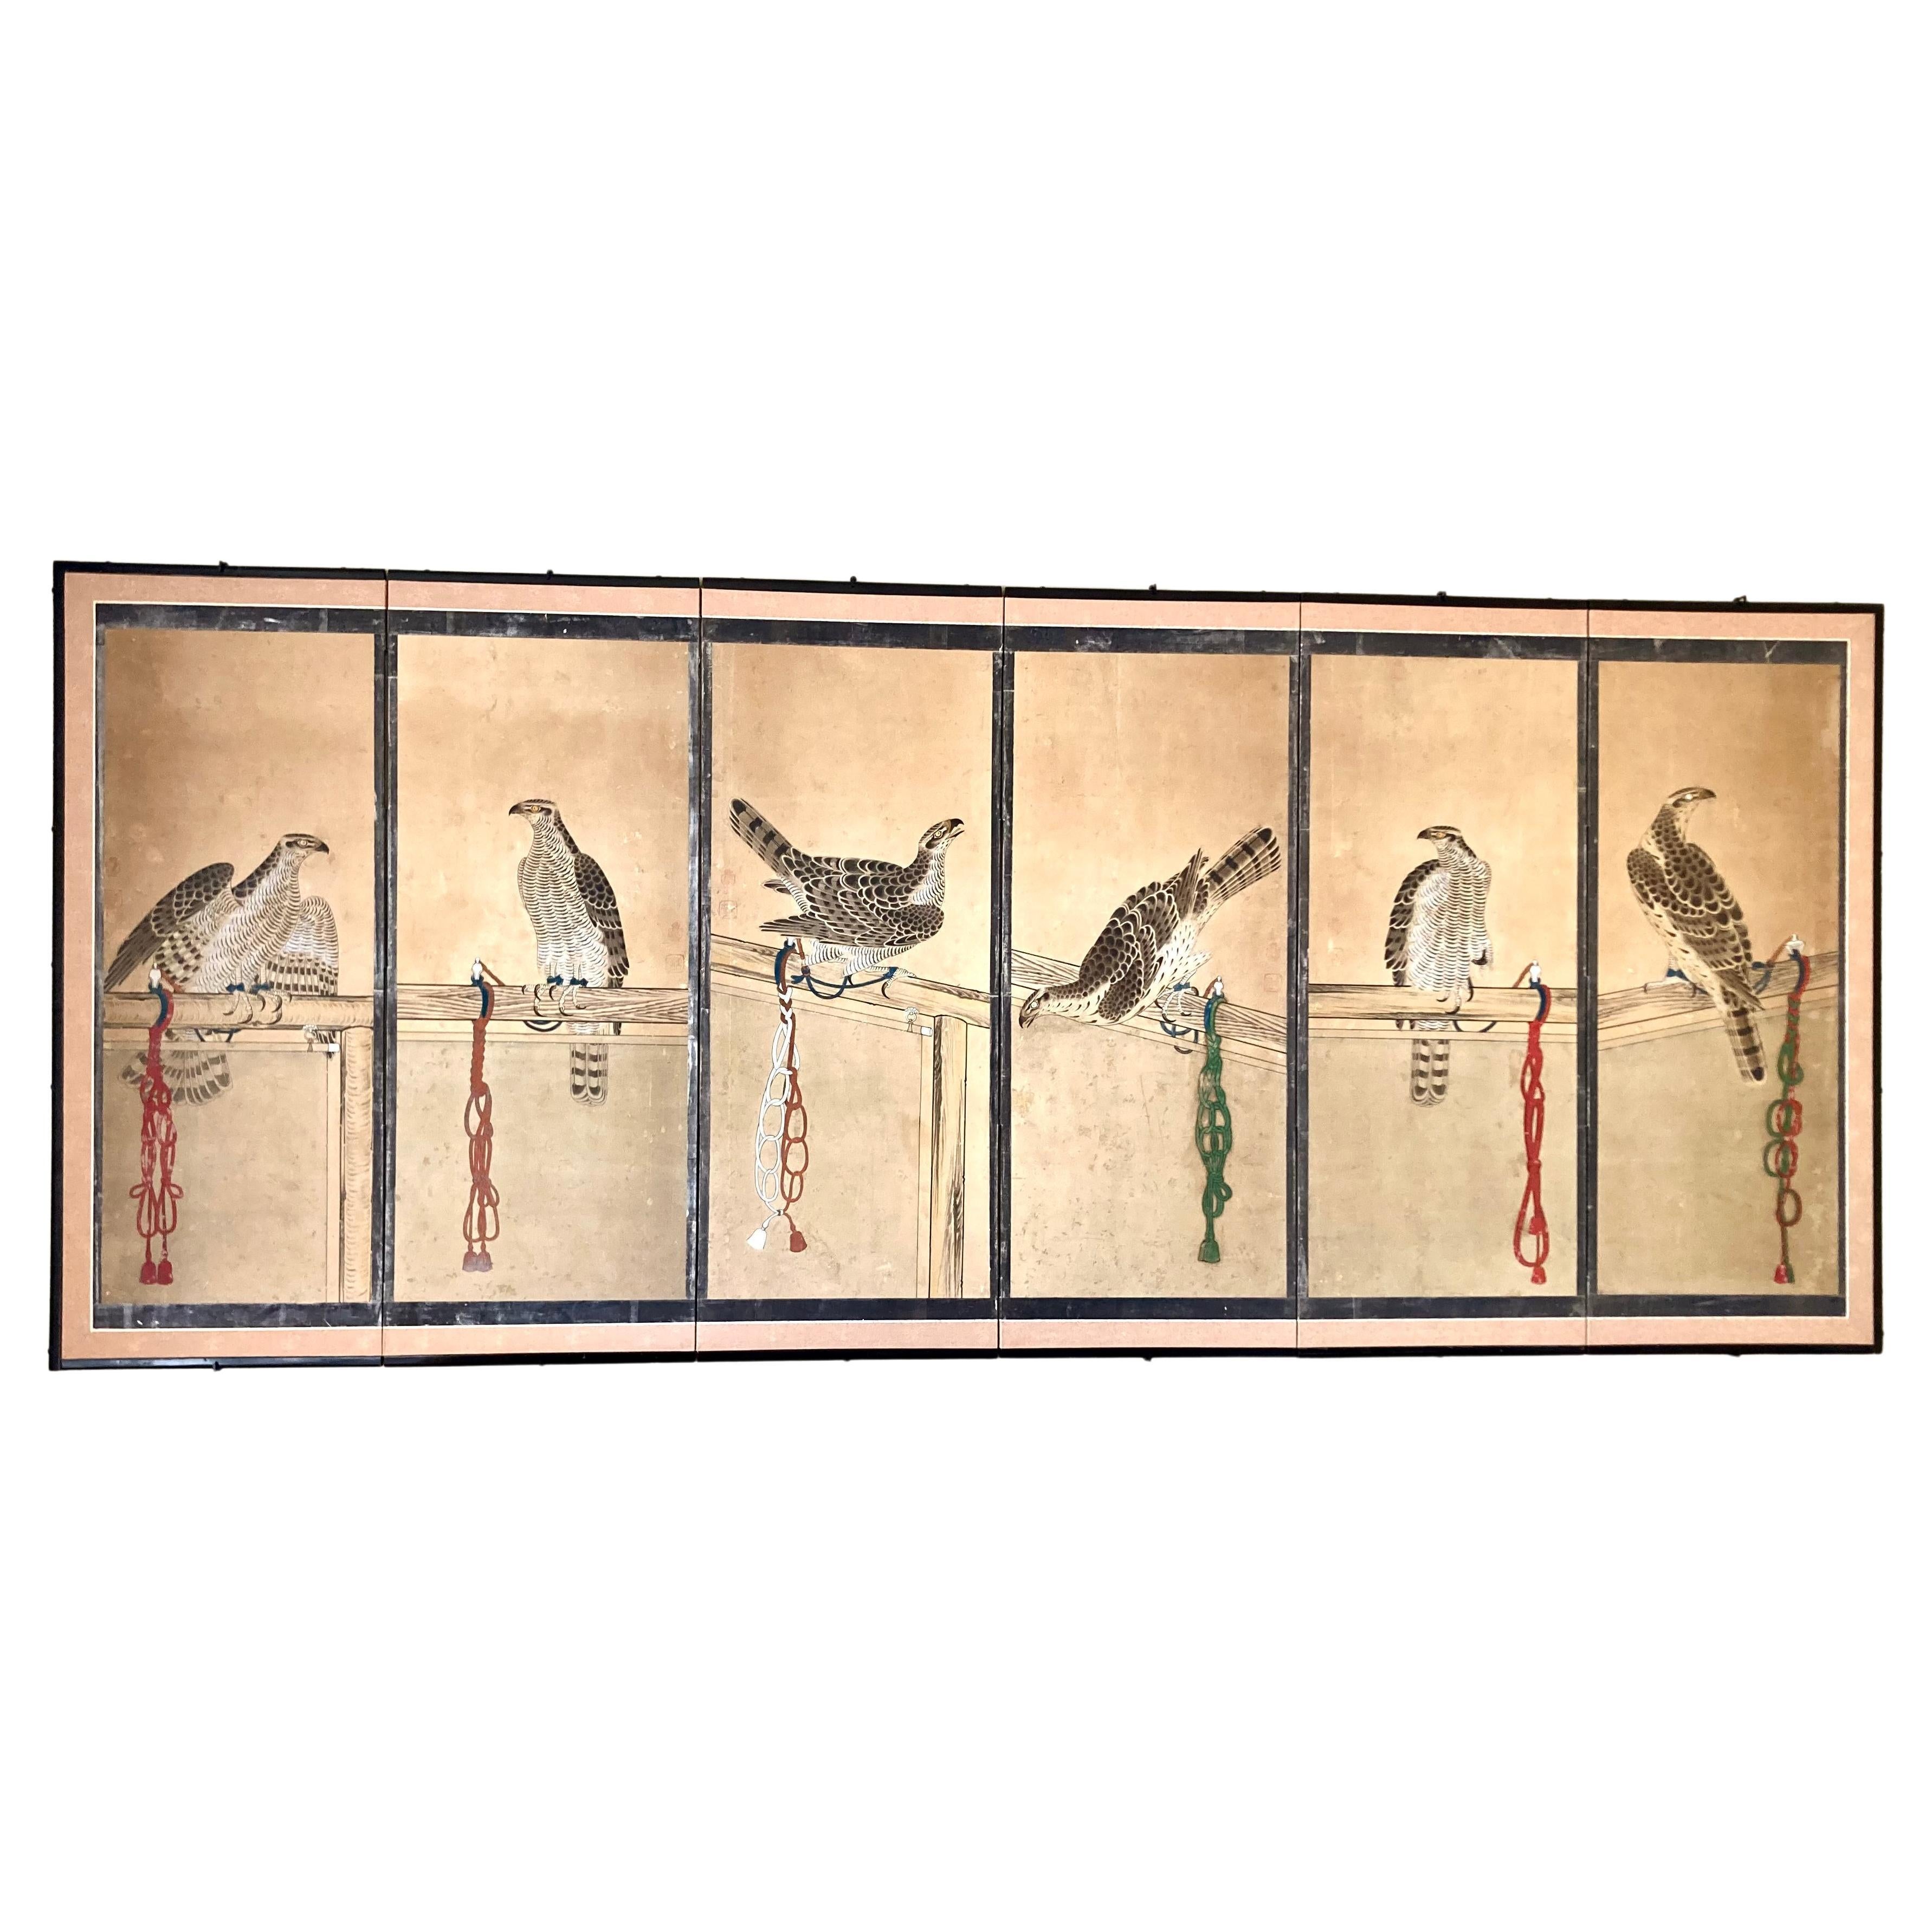 Antique Japanese Screen Painting in Ink and Colors Depicting Goshawks